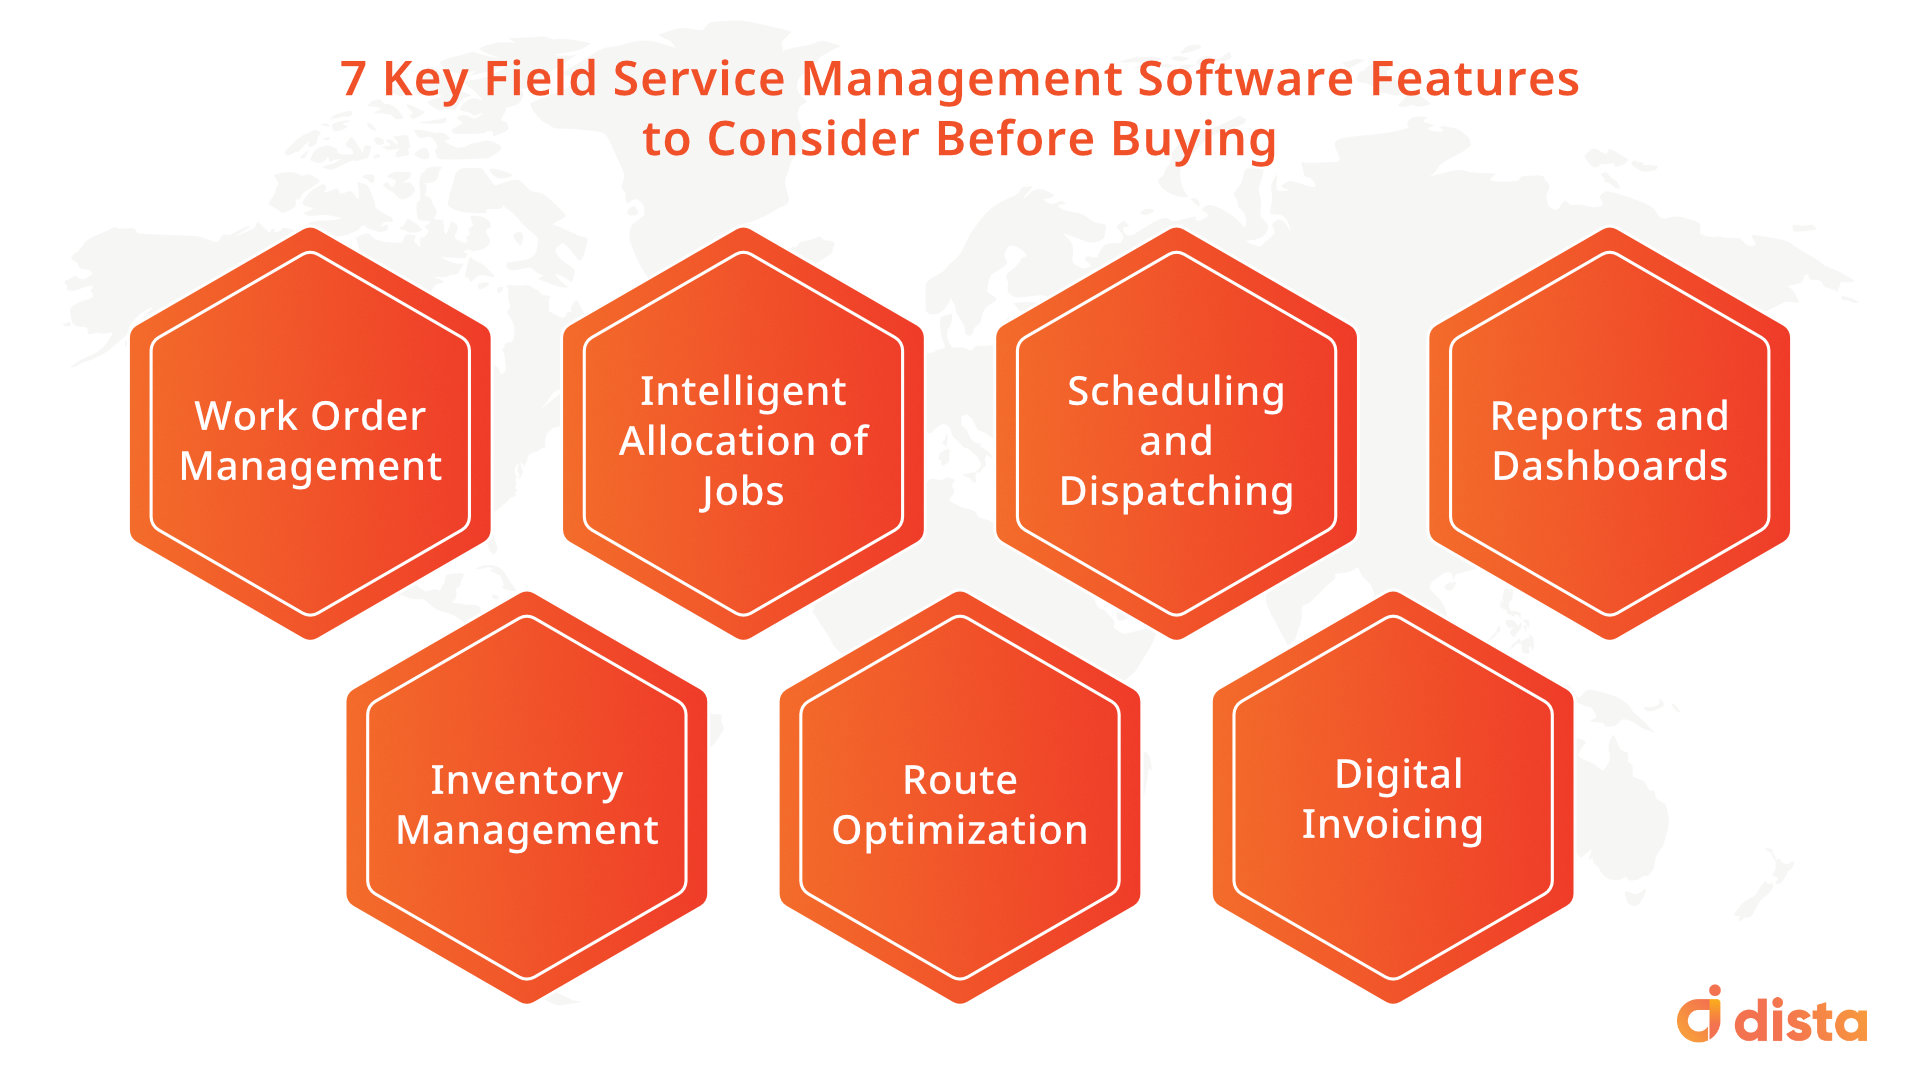 7 Key Field Service Management Software Features to Consider Before Buying